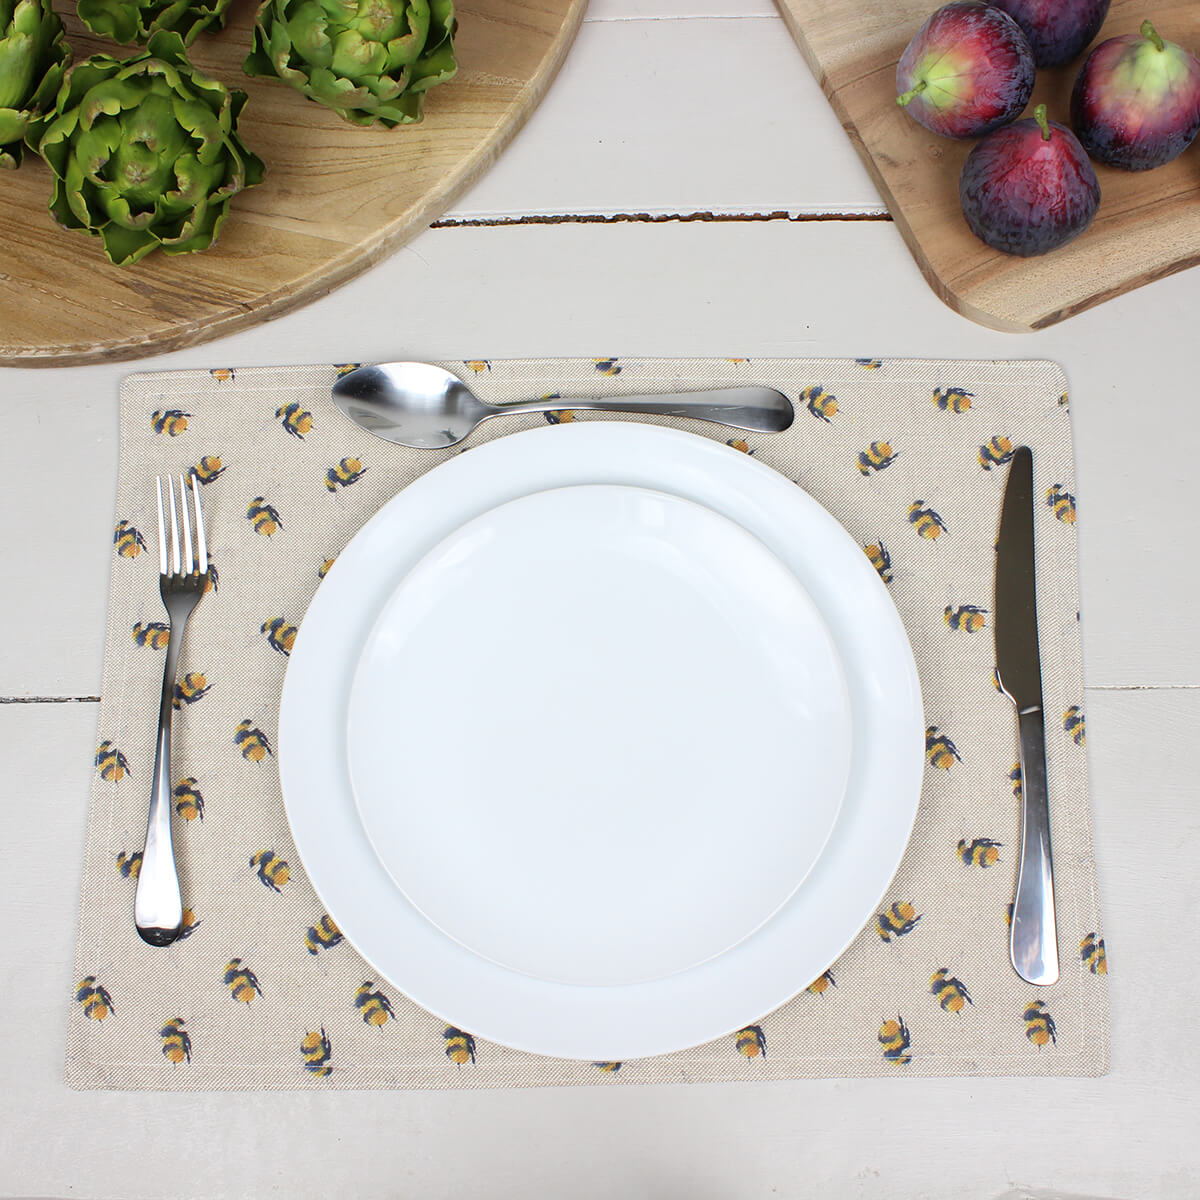 Bumble Bee Fabric Placemat